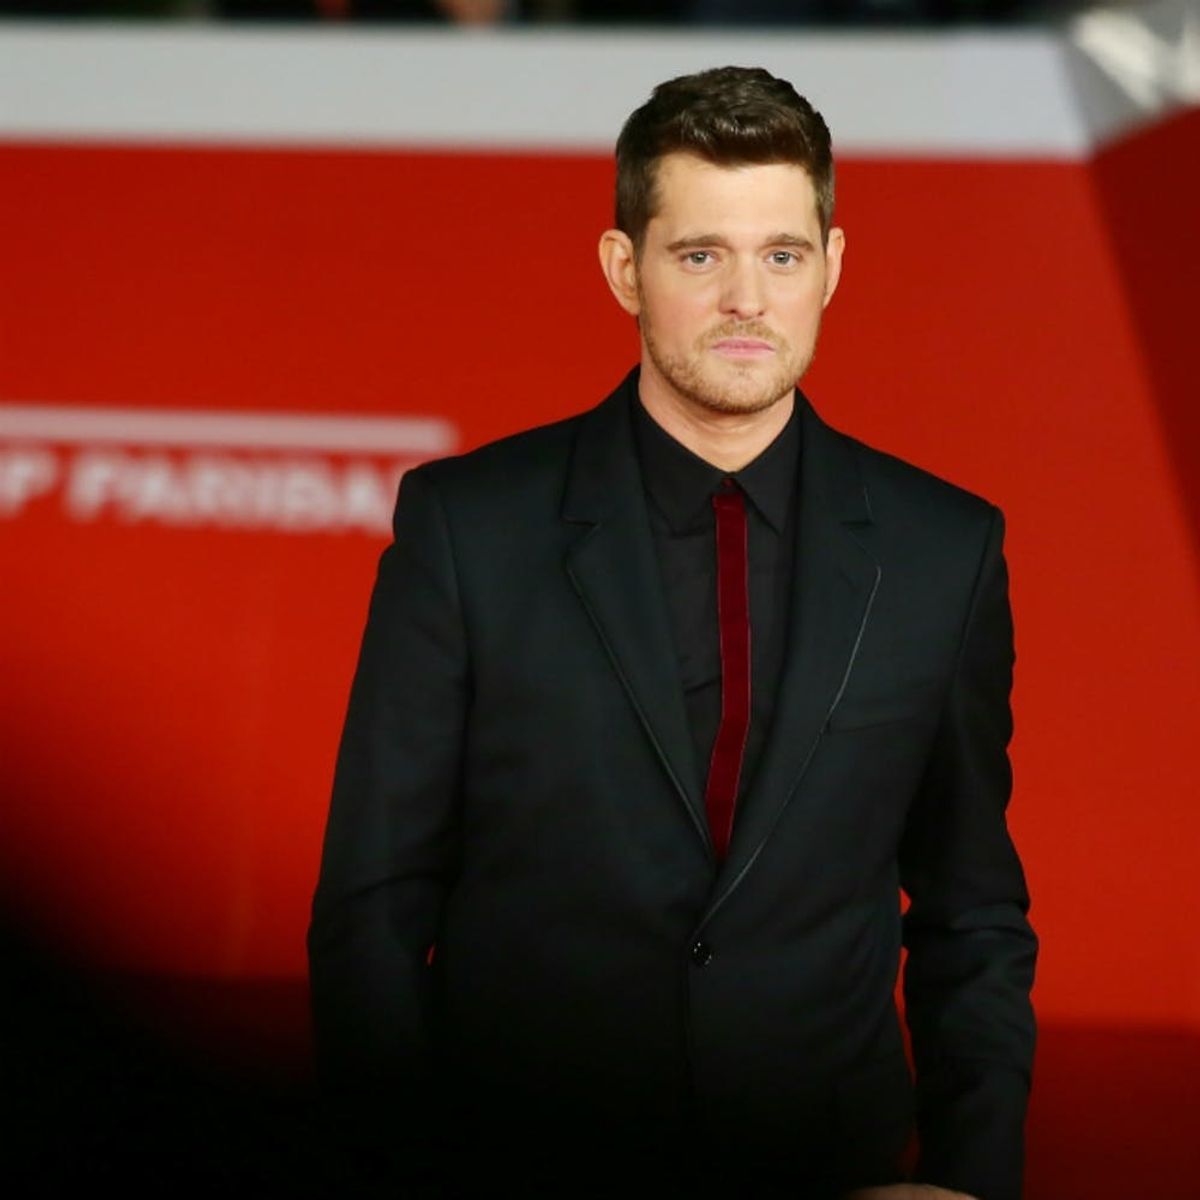 Our Hearts Go Out to Michael Bublé’s Three-Year-Old, Who Has Been Diagnosed With Cancer